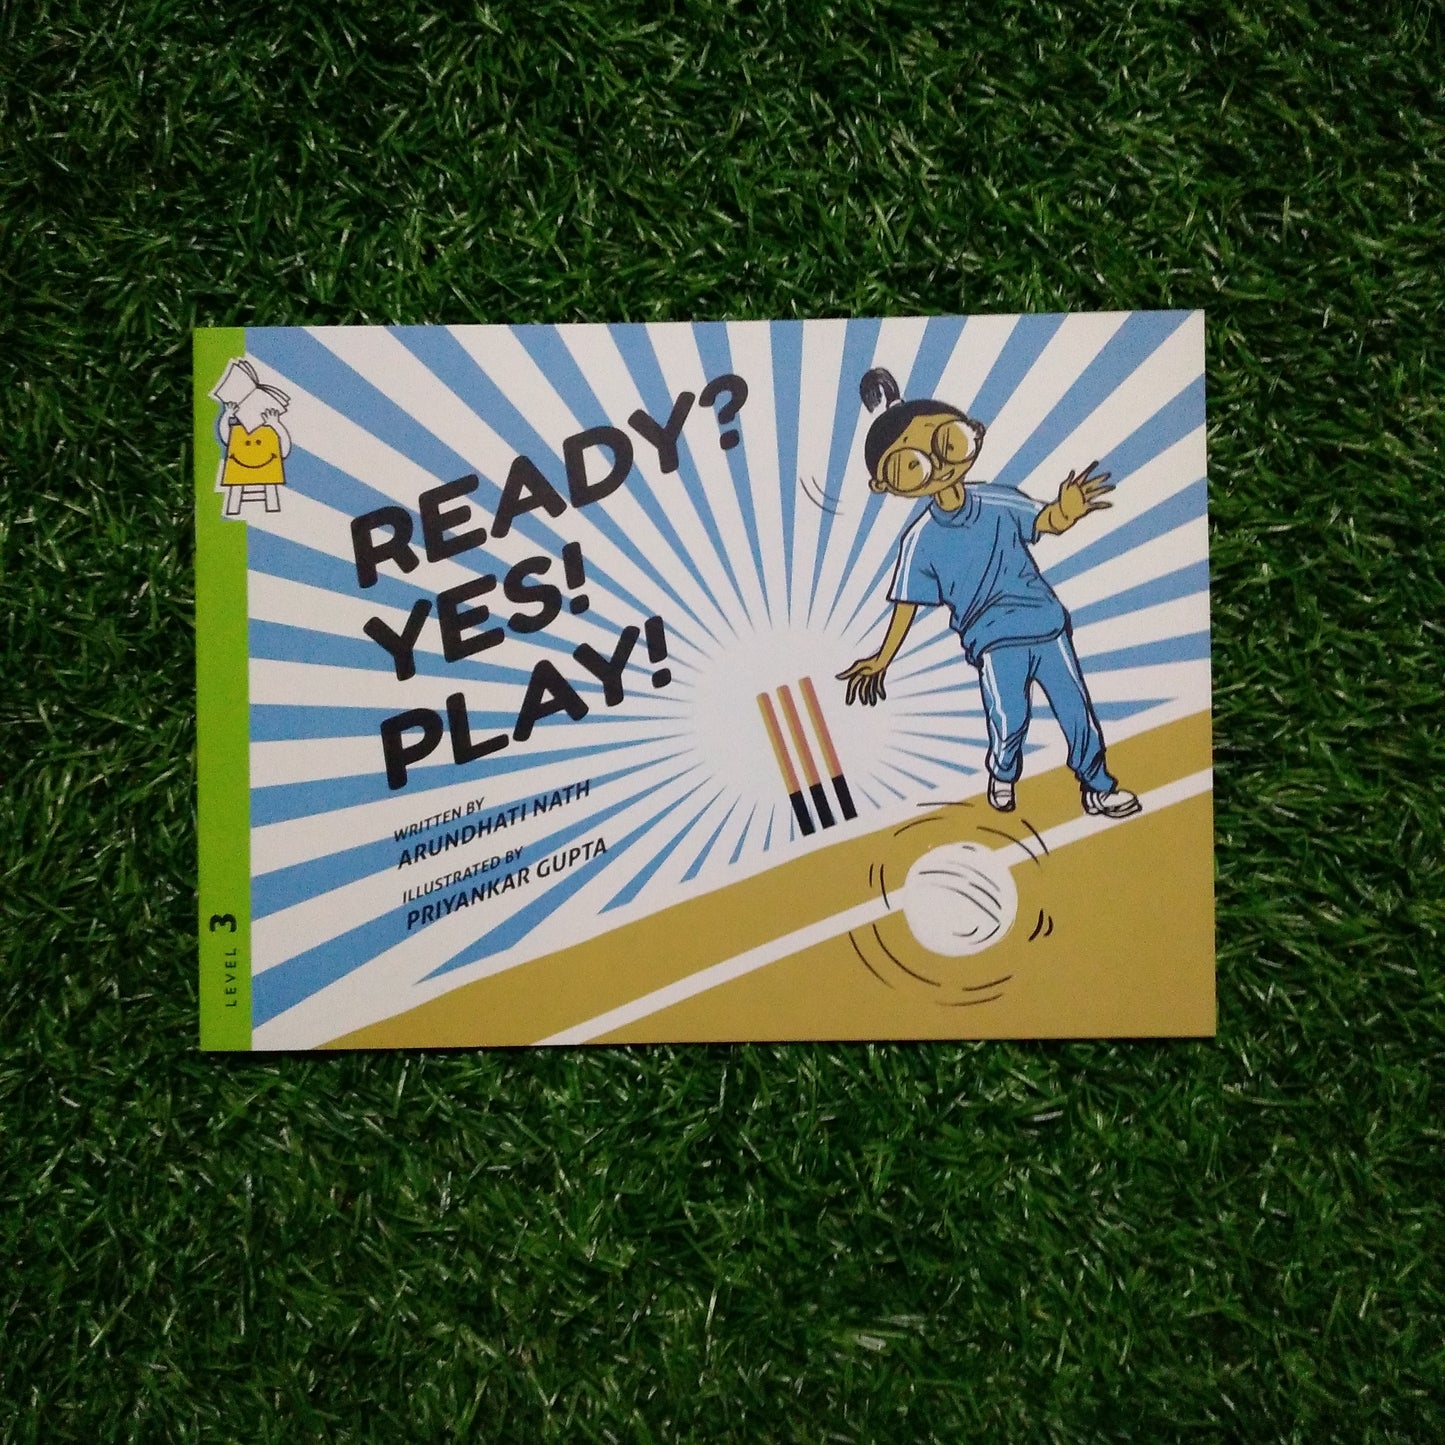 Ready? Yes! Play! - English